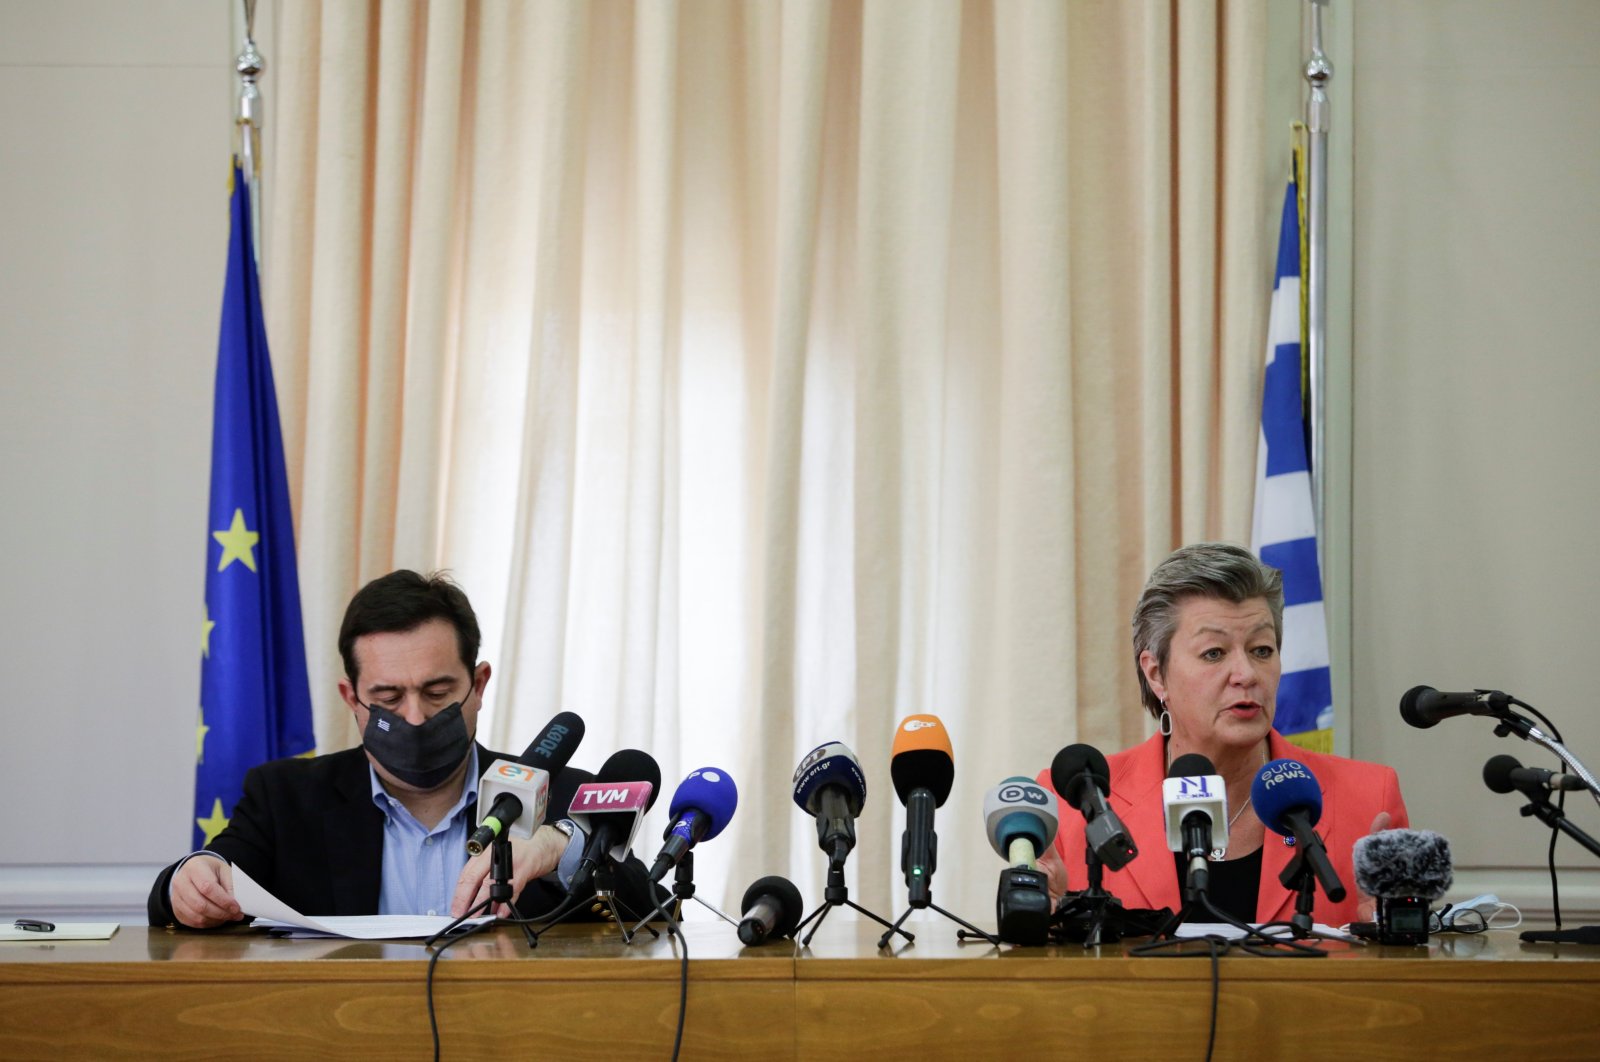 Greek Migration Minister Notis Mitarachi (L) listens as European Commissioner for Home Affairs, Ylva Johansson speaks during a joint news conference, in the city of Mytilene, on the island of Lesbos, Greece, March 29, 2021. (Reuters Photo)